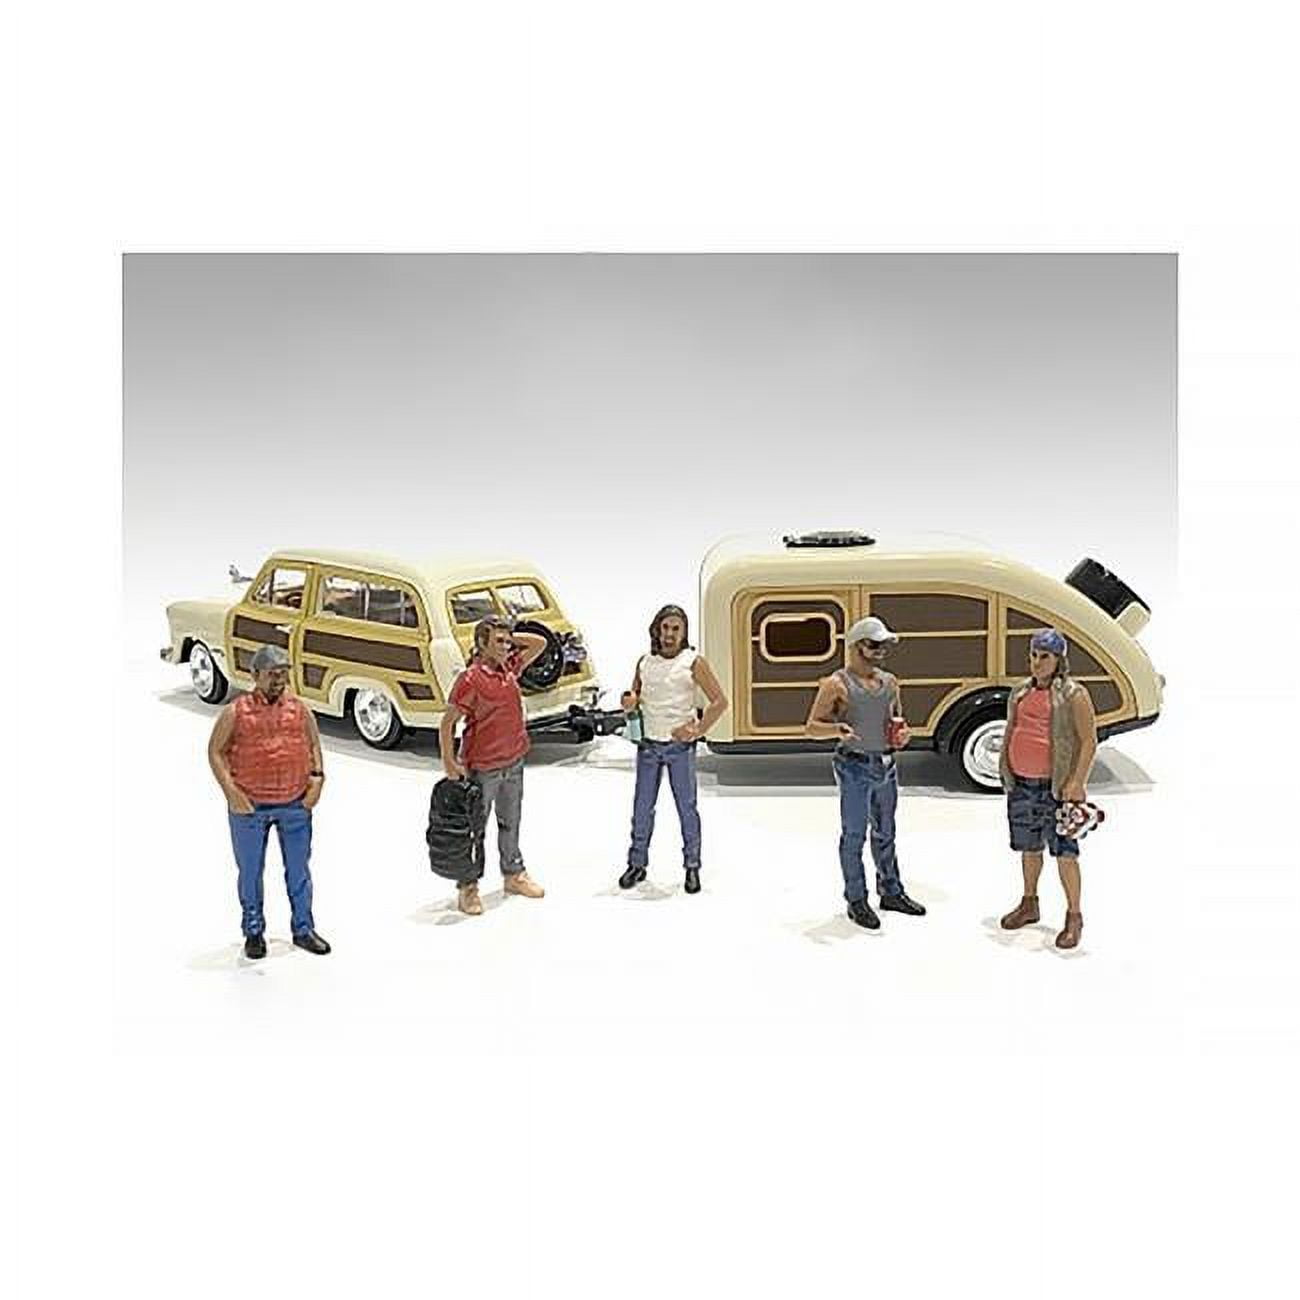 Picture of American Diorama 76334-76335-76336-76337-76338 Campers Figure Set for 1 by 18 Scale Models - 5 Piece